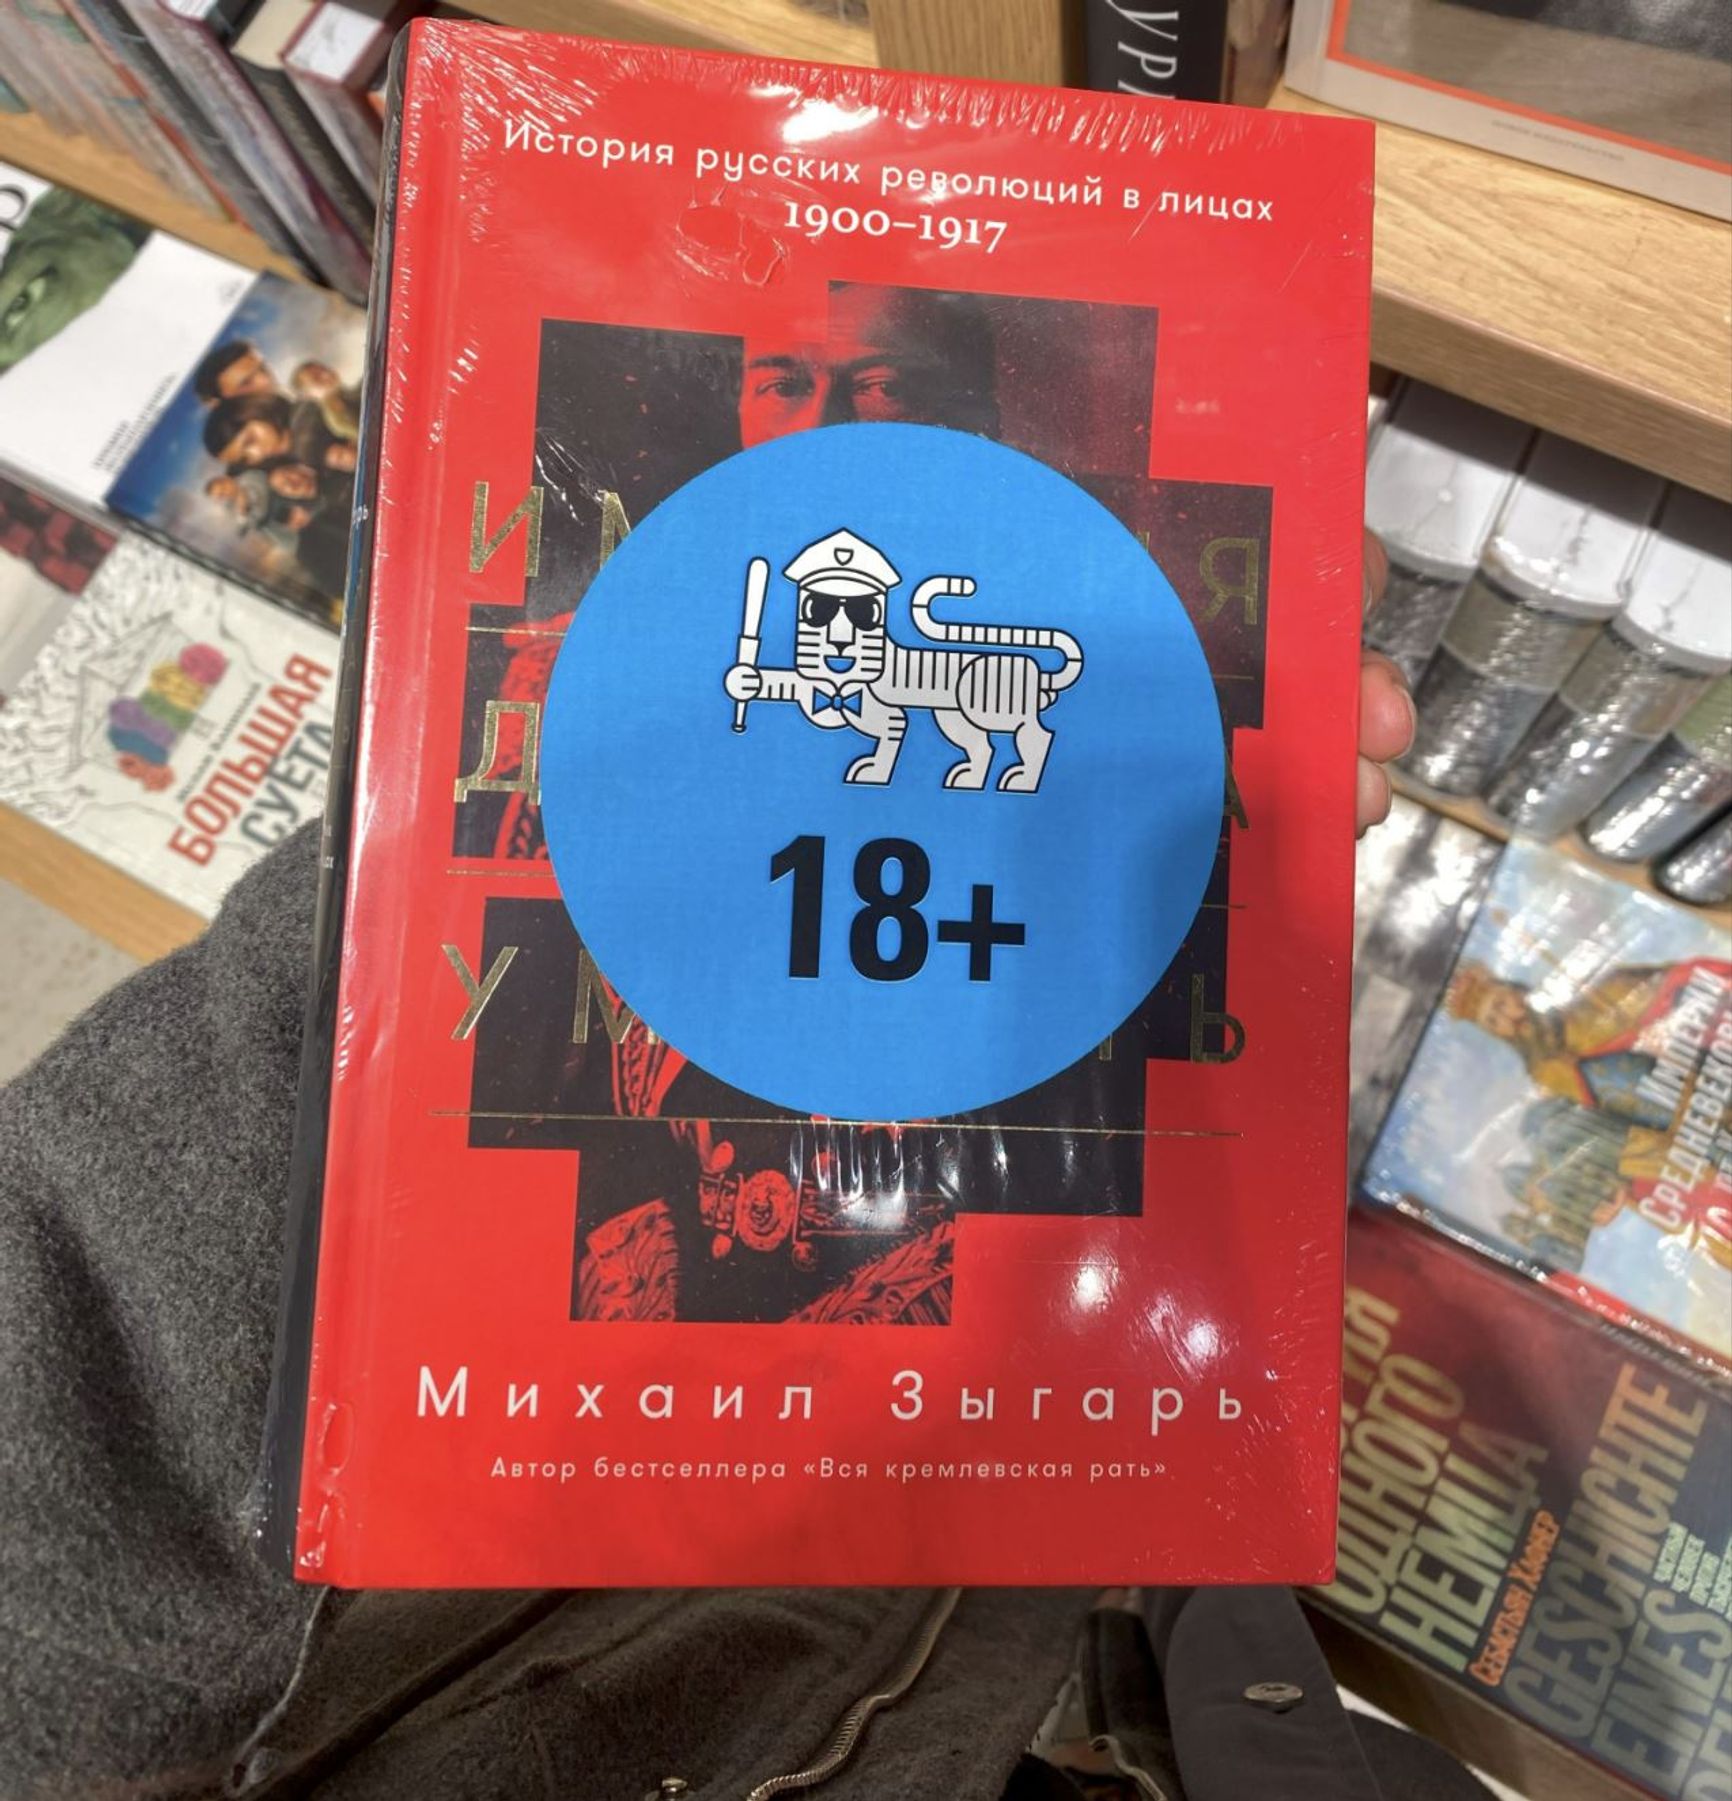 A book by a “foreign agent” in a Respublika bookstore